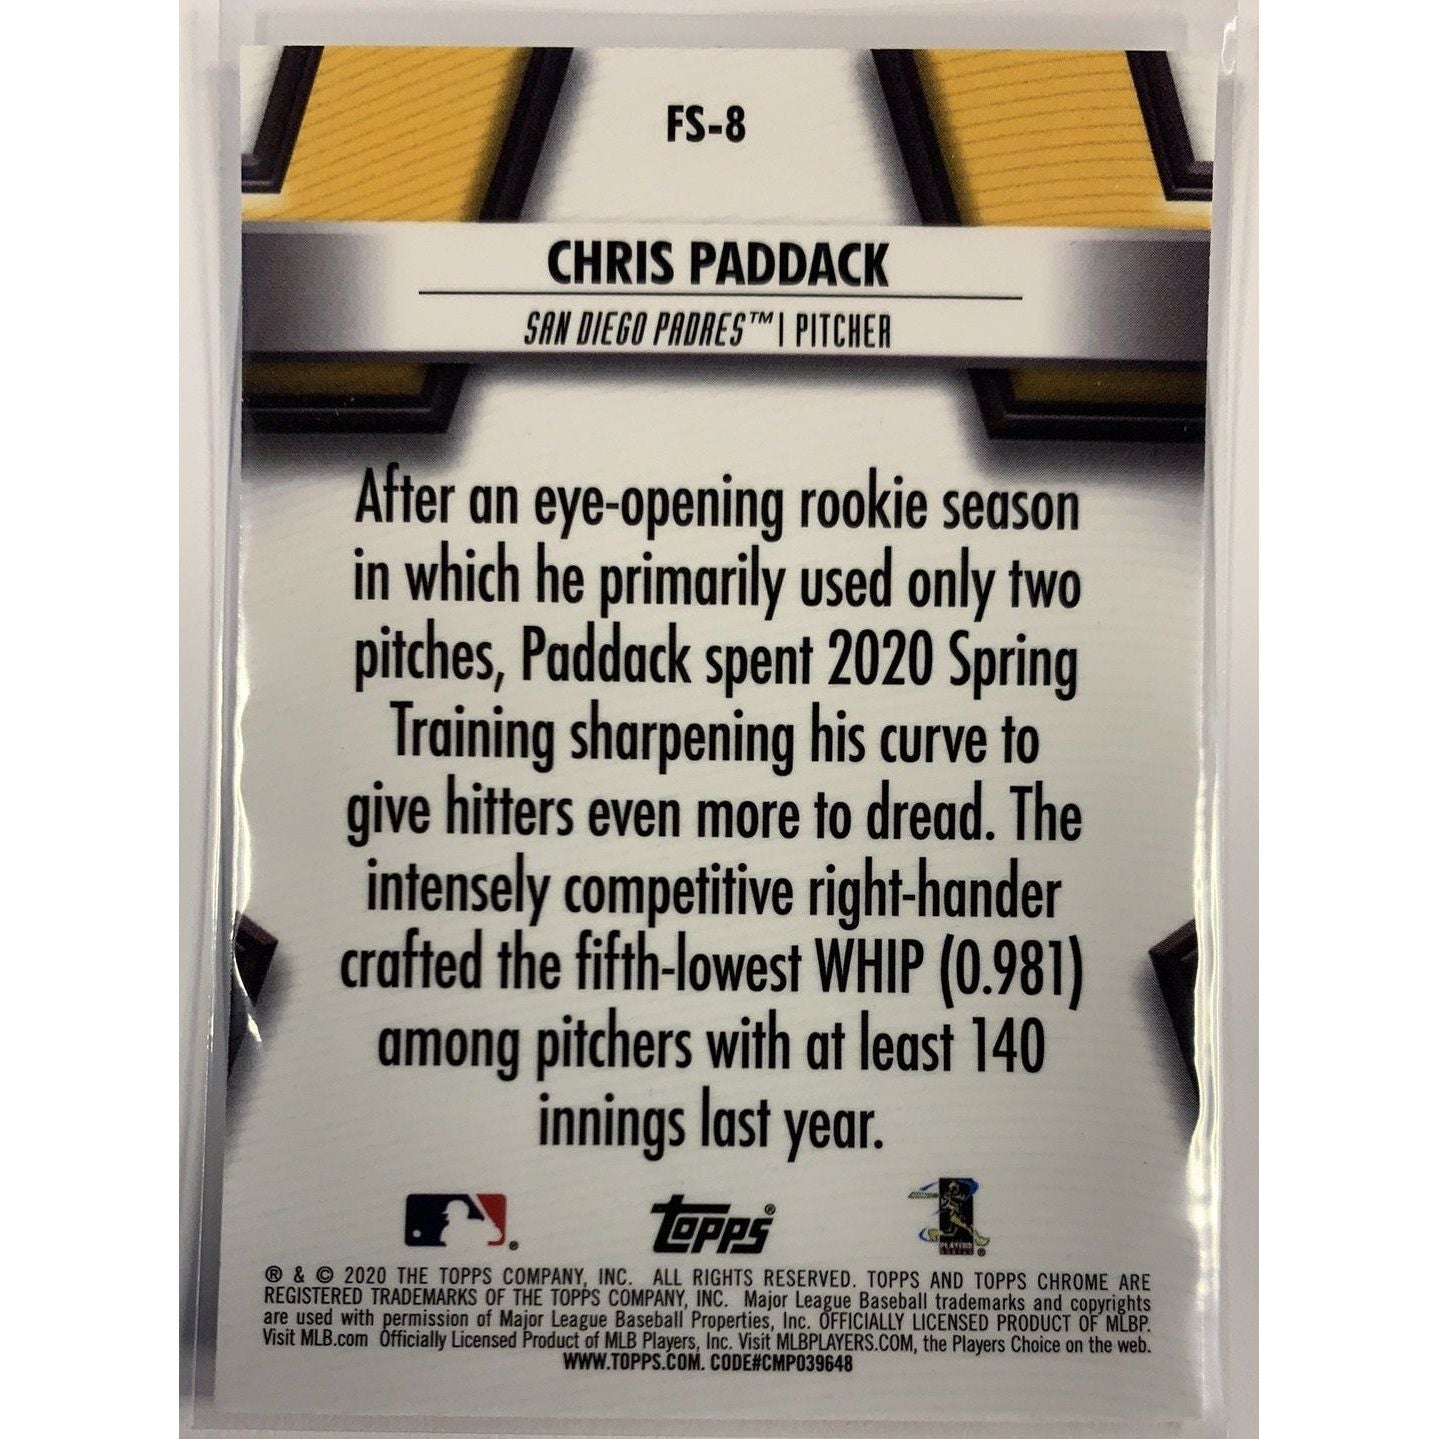  2020 Topps Chrome Chris Paddock Future Stars  Local Legends Cards & Collectibles